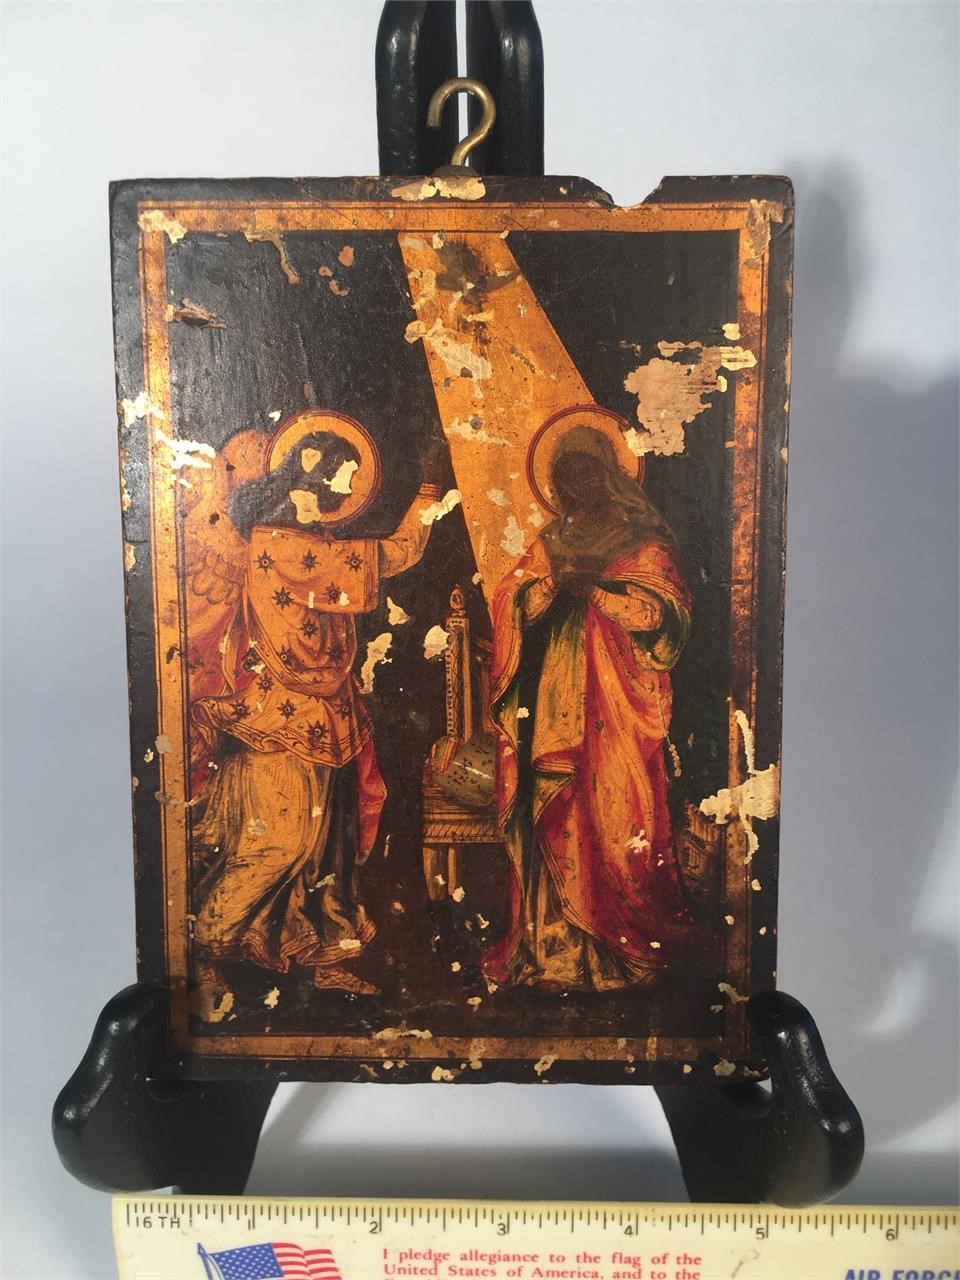 Fantastic Late 1700s Gilt Icon Painting On Wood